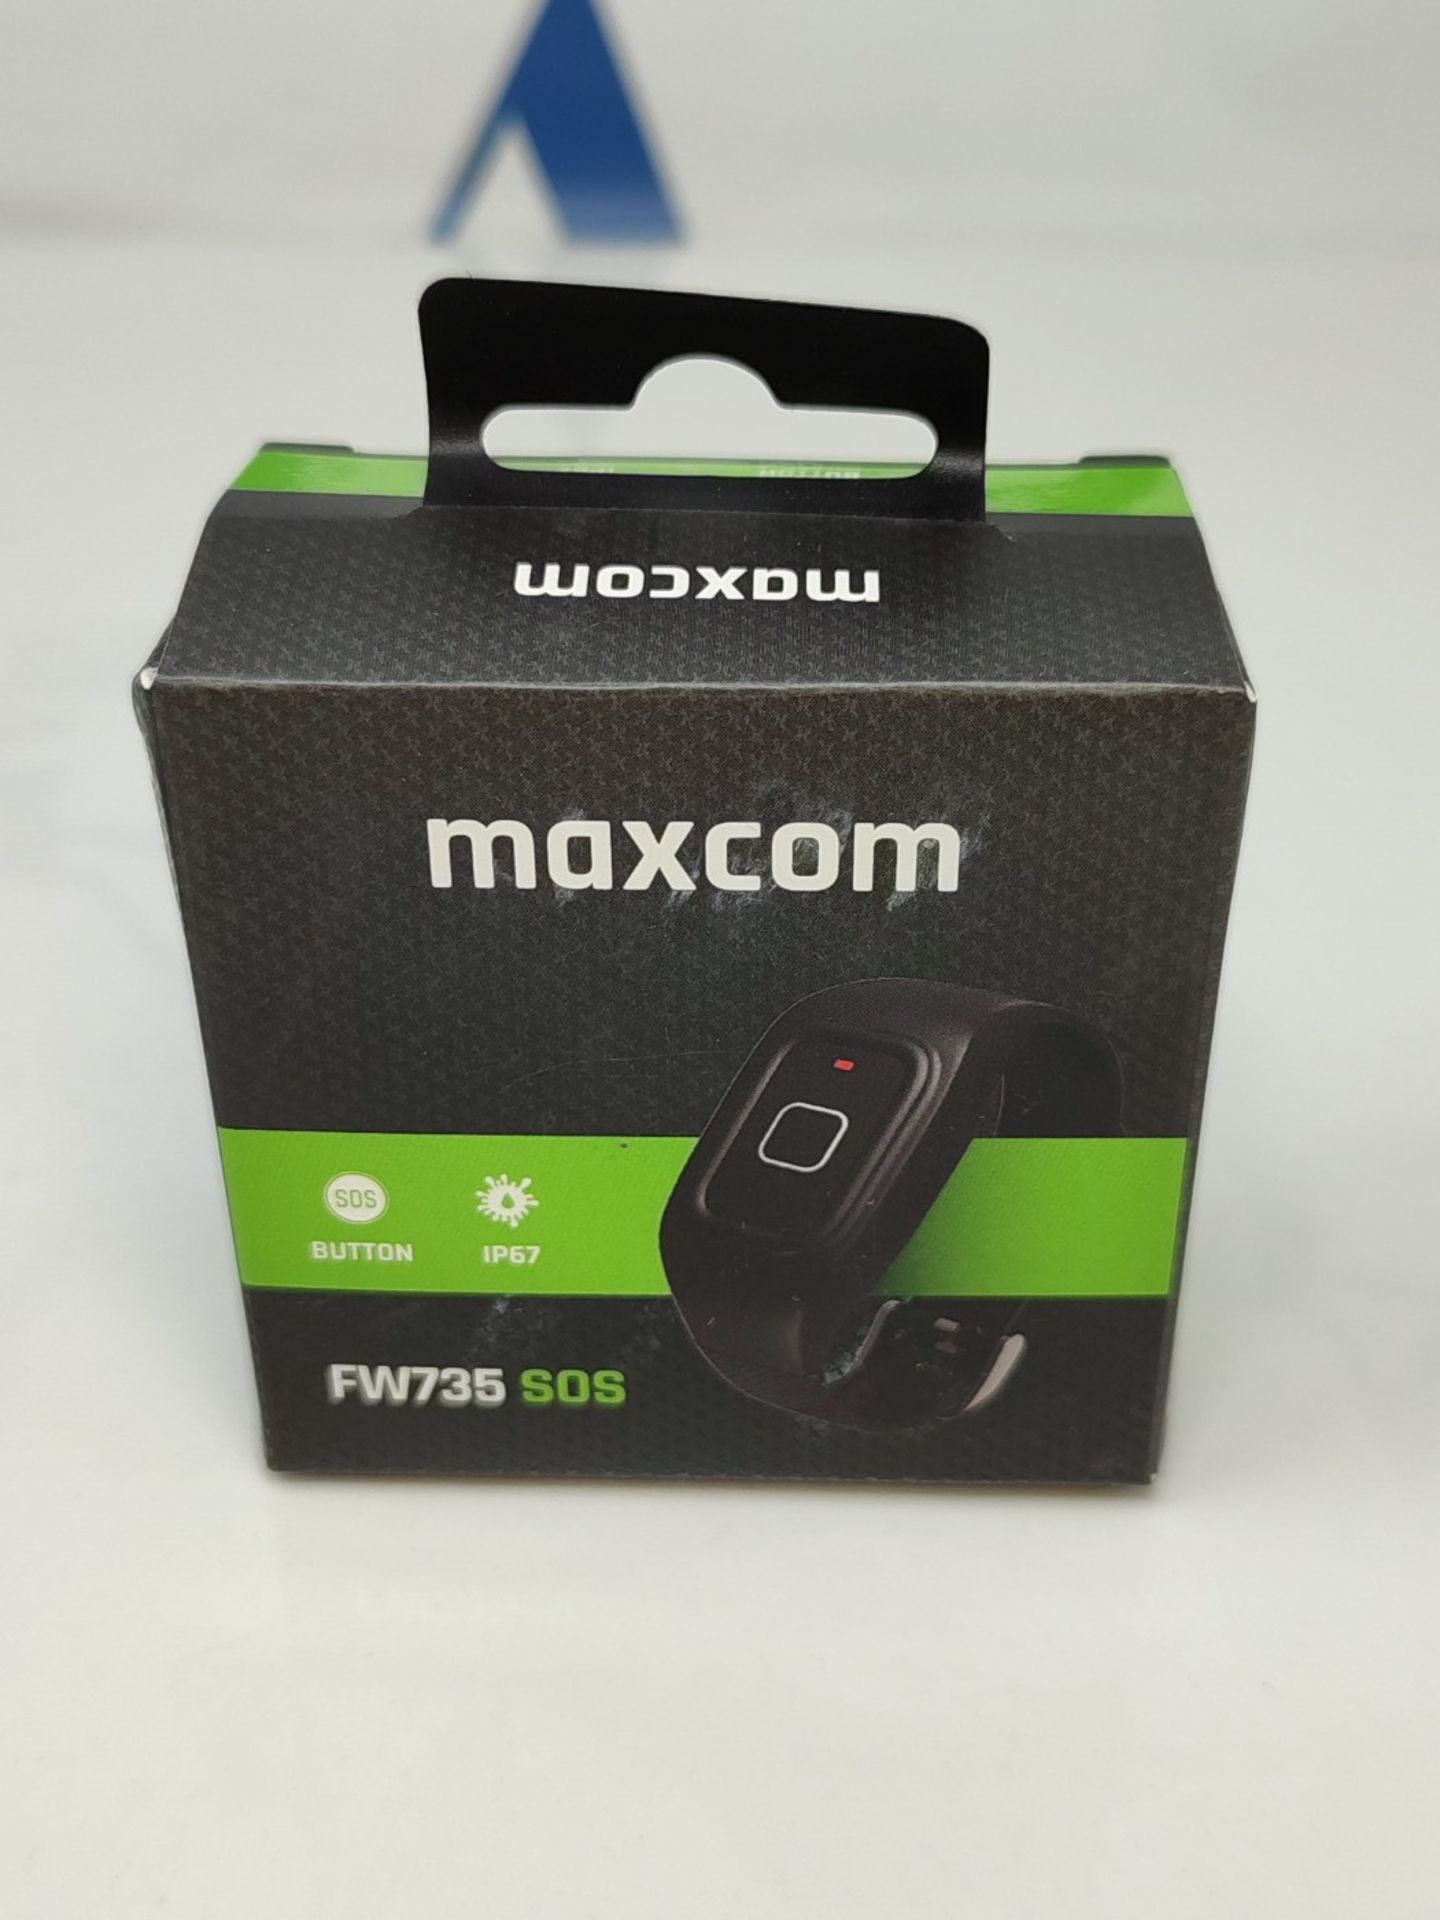 Maxcom FW735 - Emergency bracelet for older people, adults, with SOS emergency button,